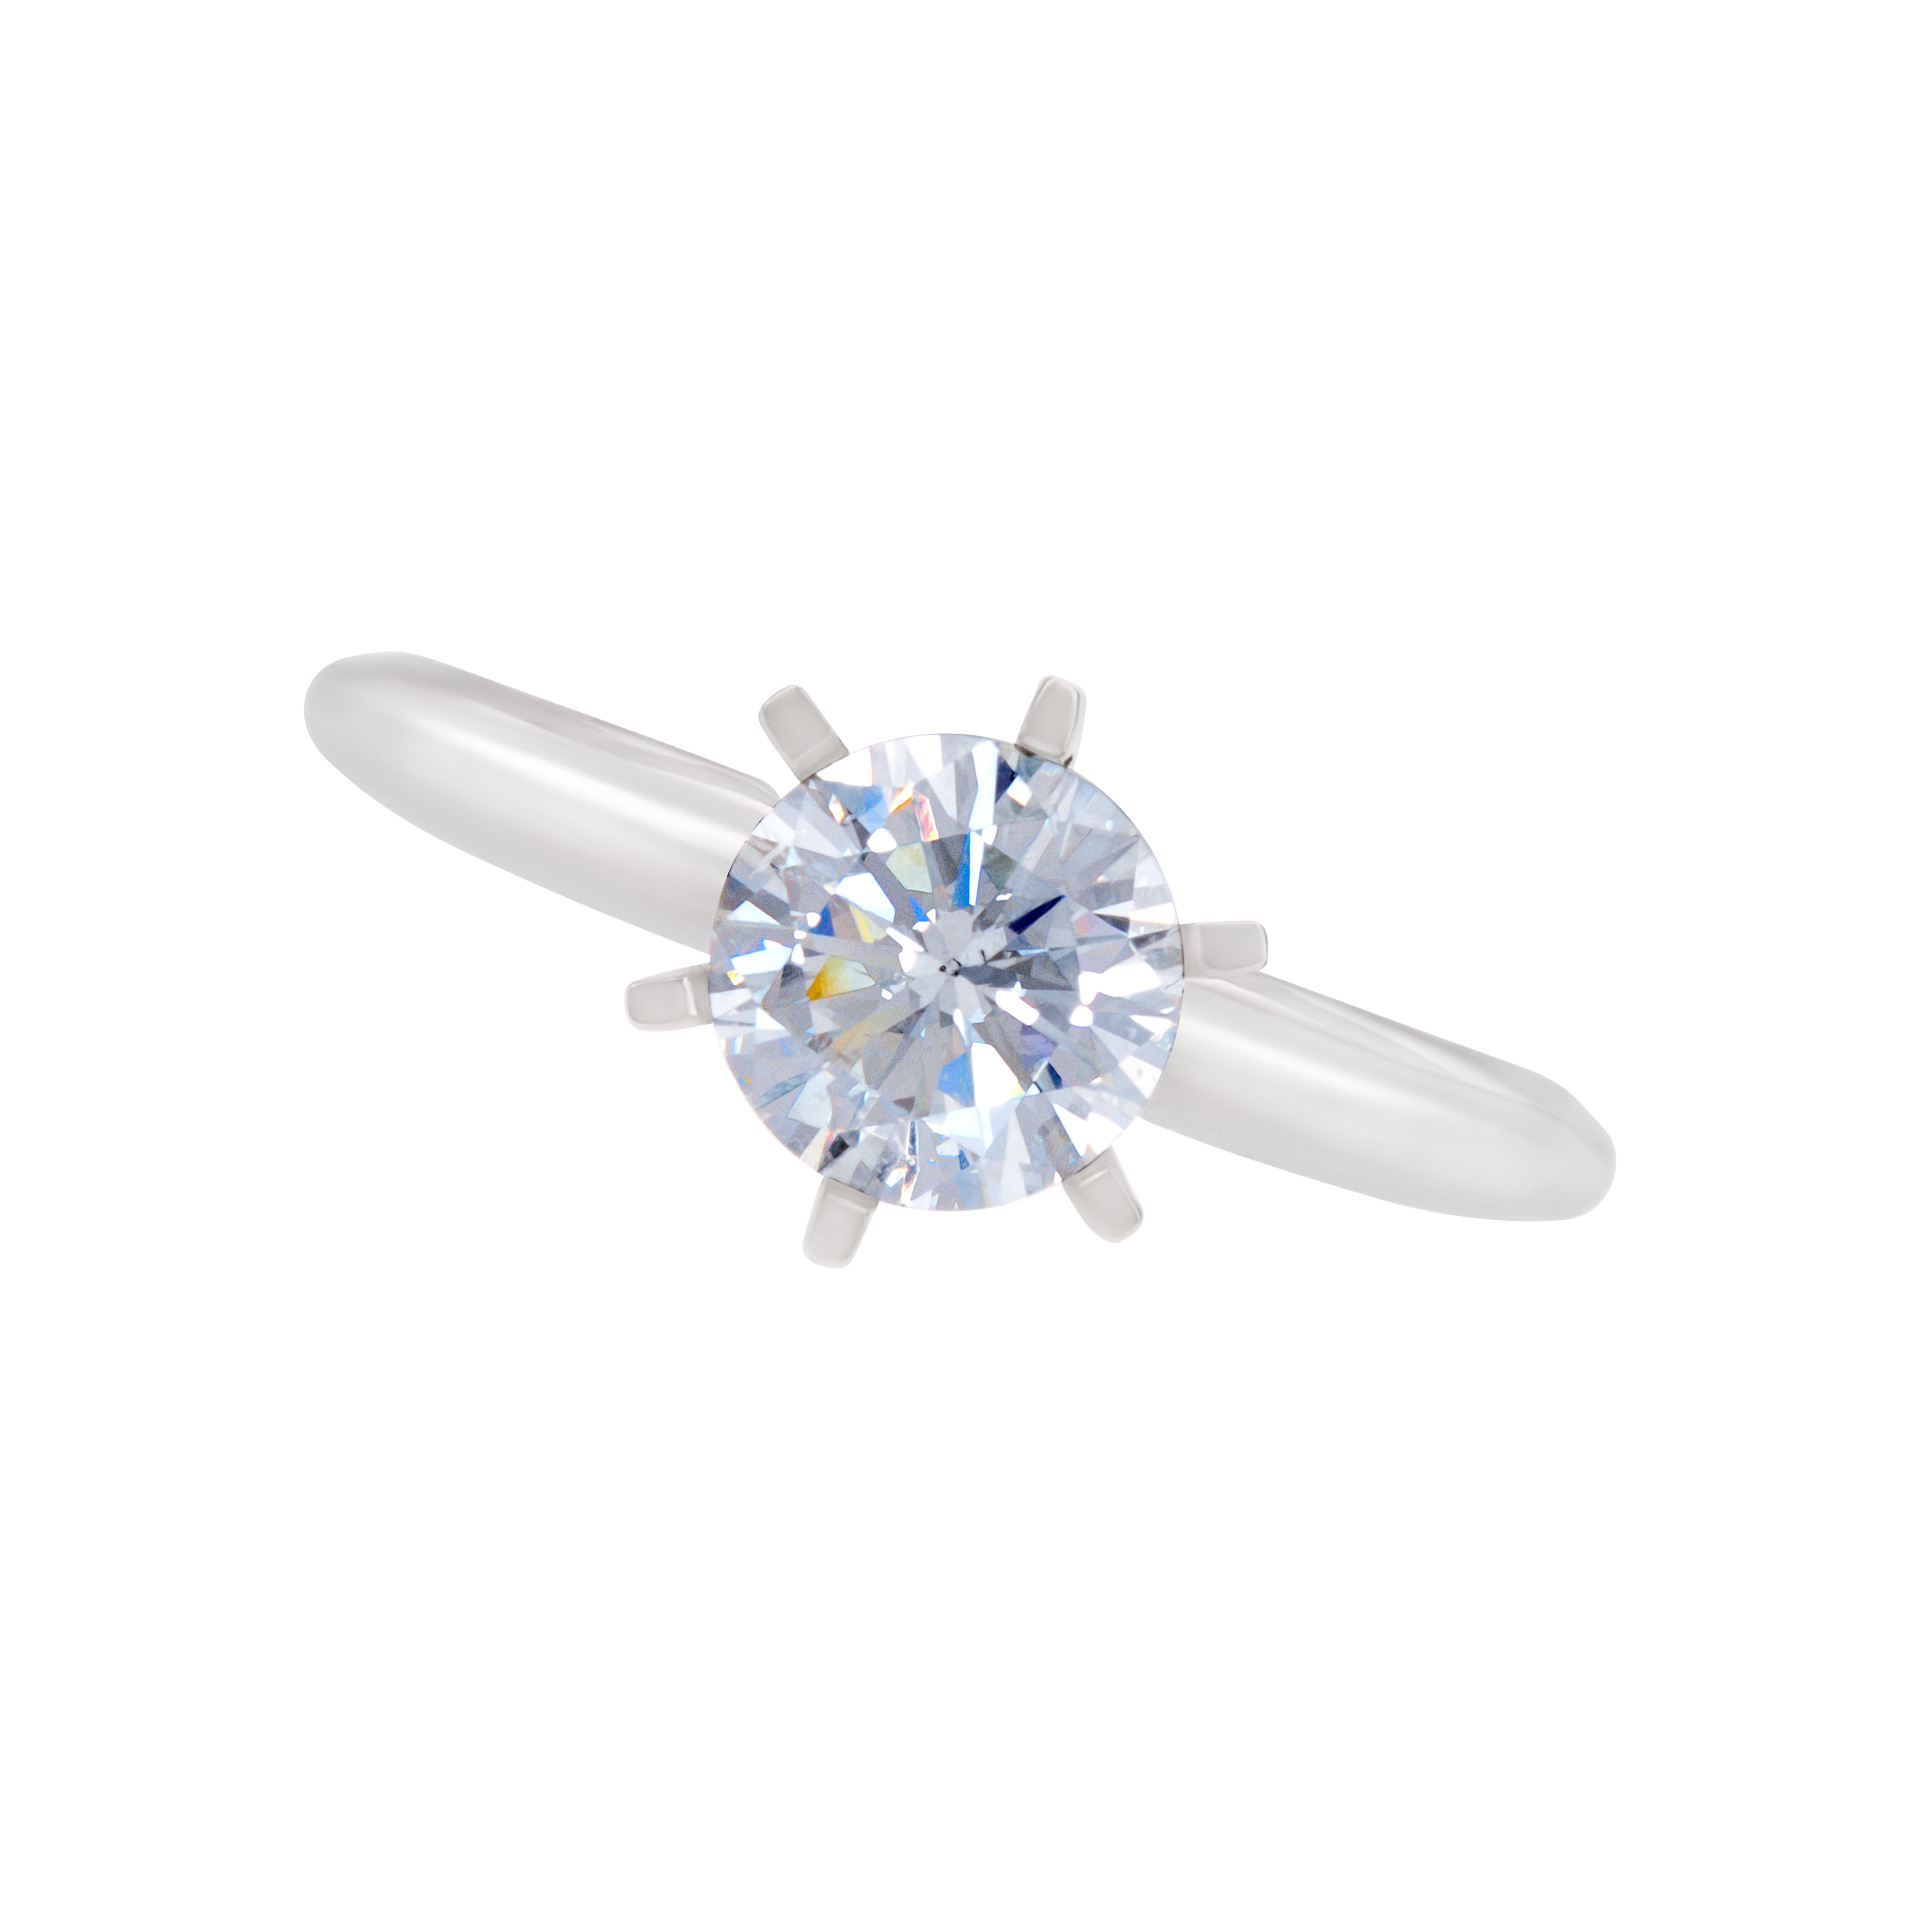 GIA Certified Round Diamond 1.02cts  (G Color I-1 Clarity). Set in 18k white gold stud image 1